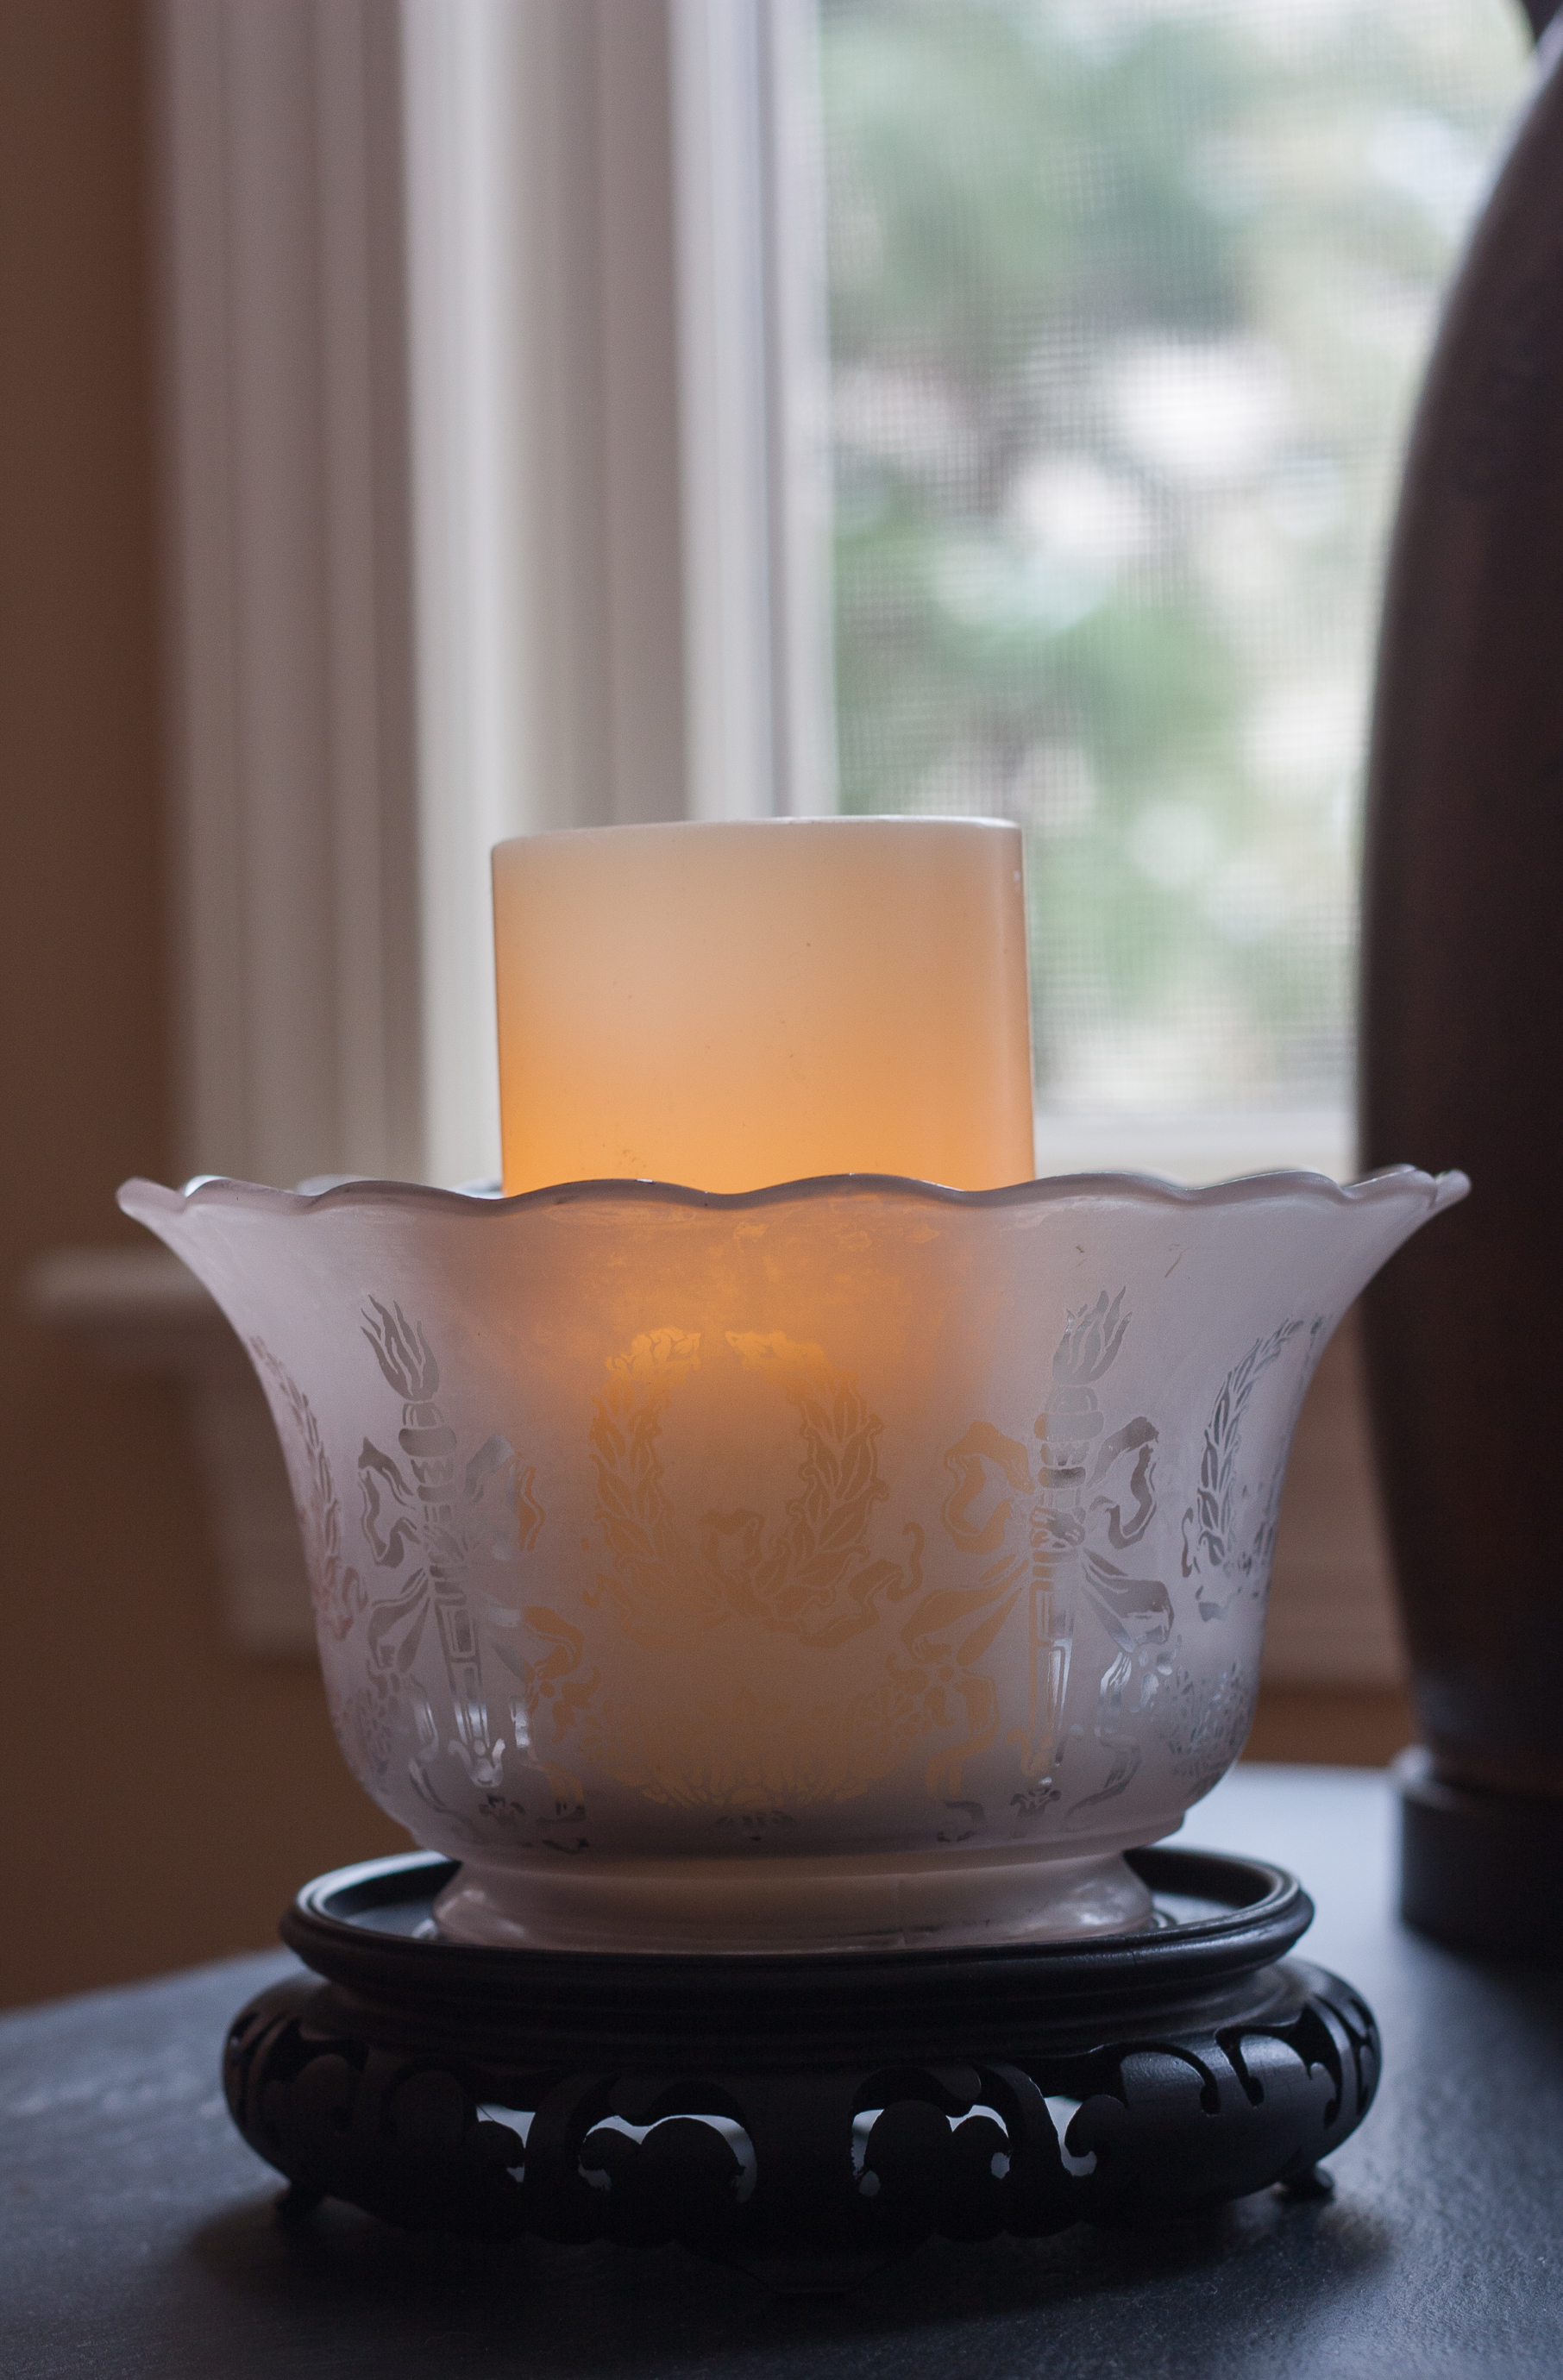 Antique glass light shade used with a candle.